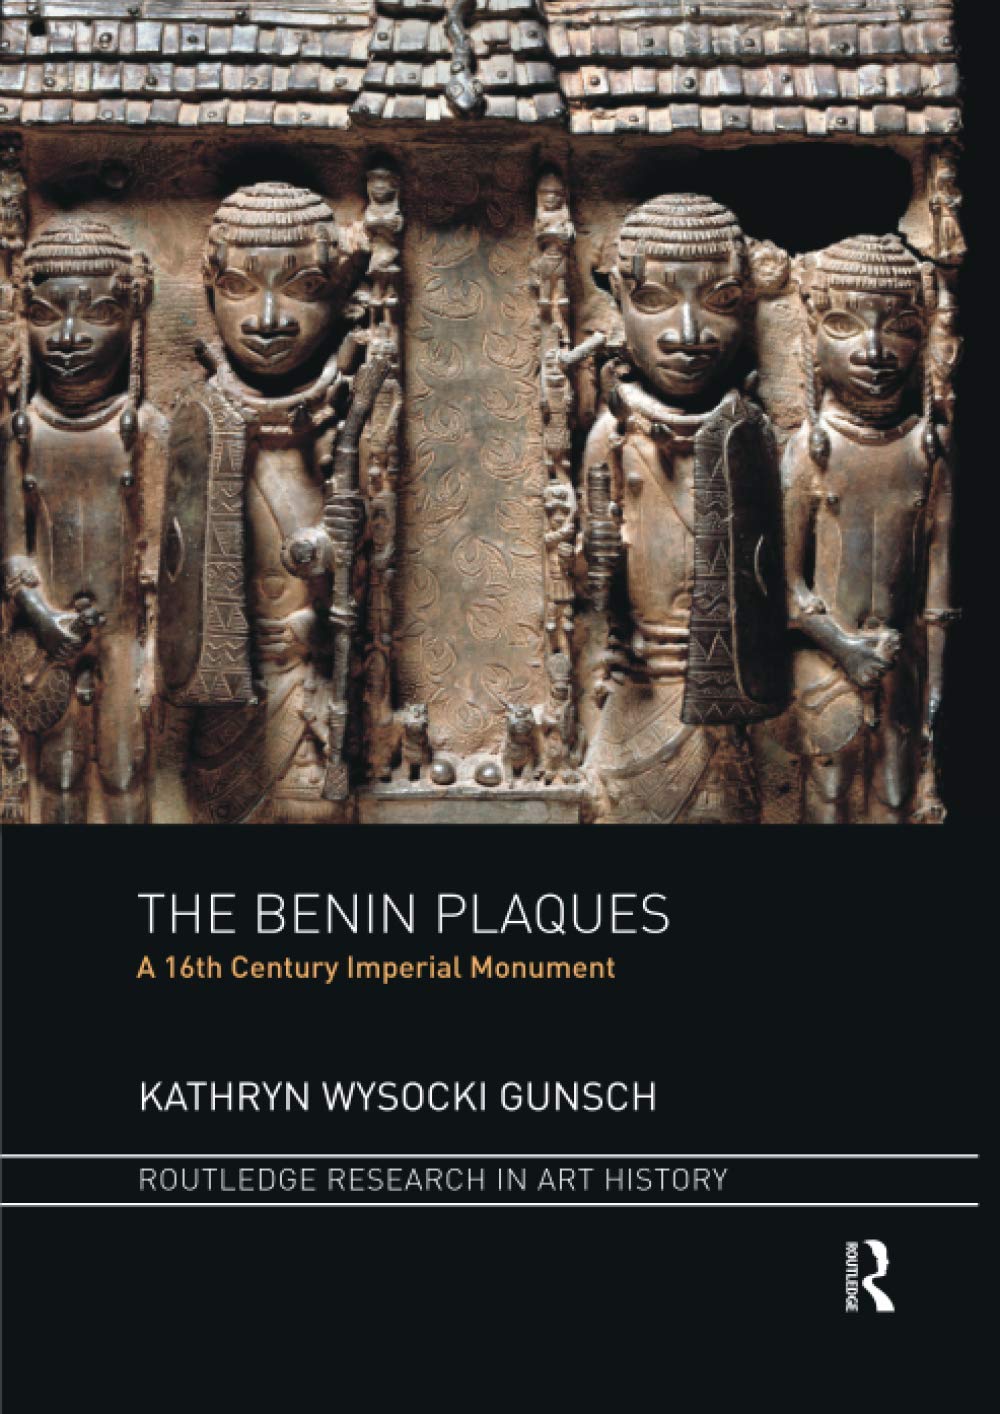 The Benin Plaques (Routledge Research in Art History)